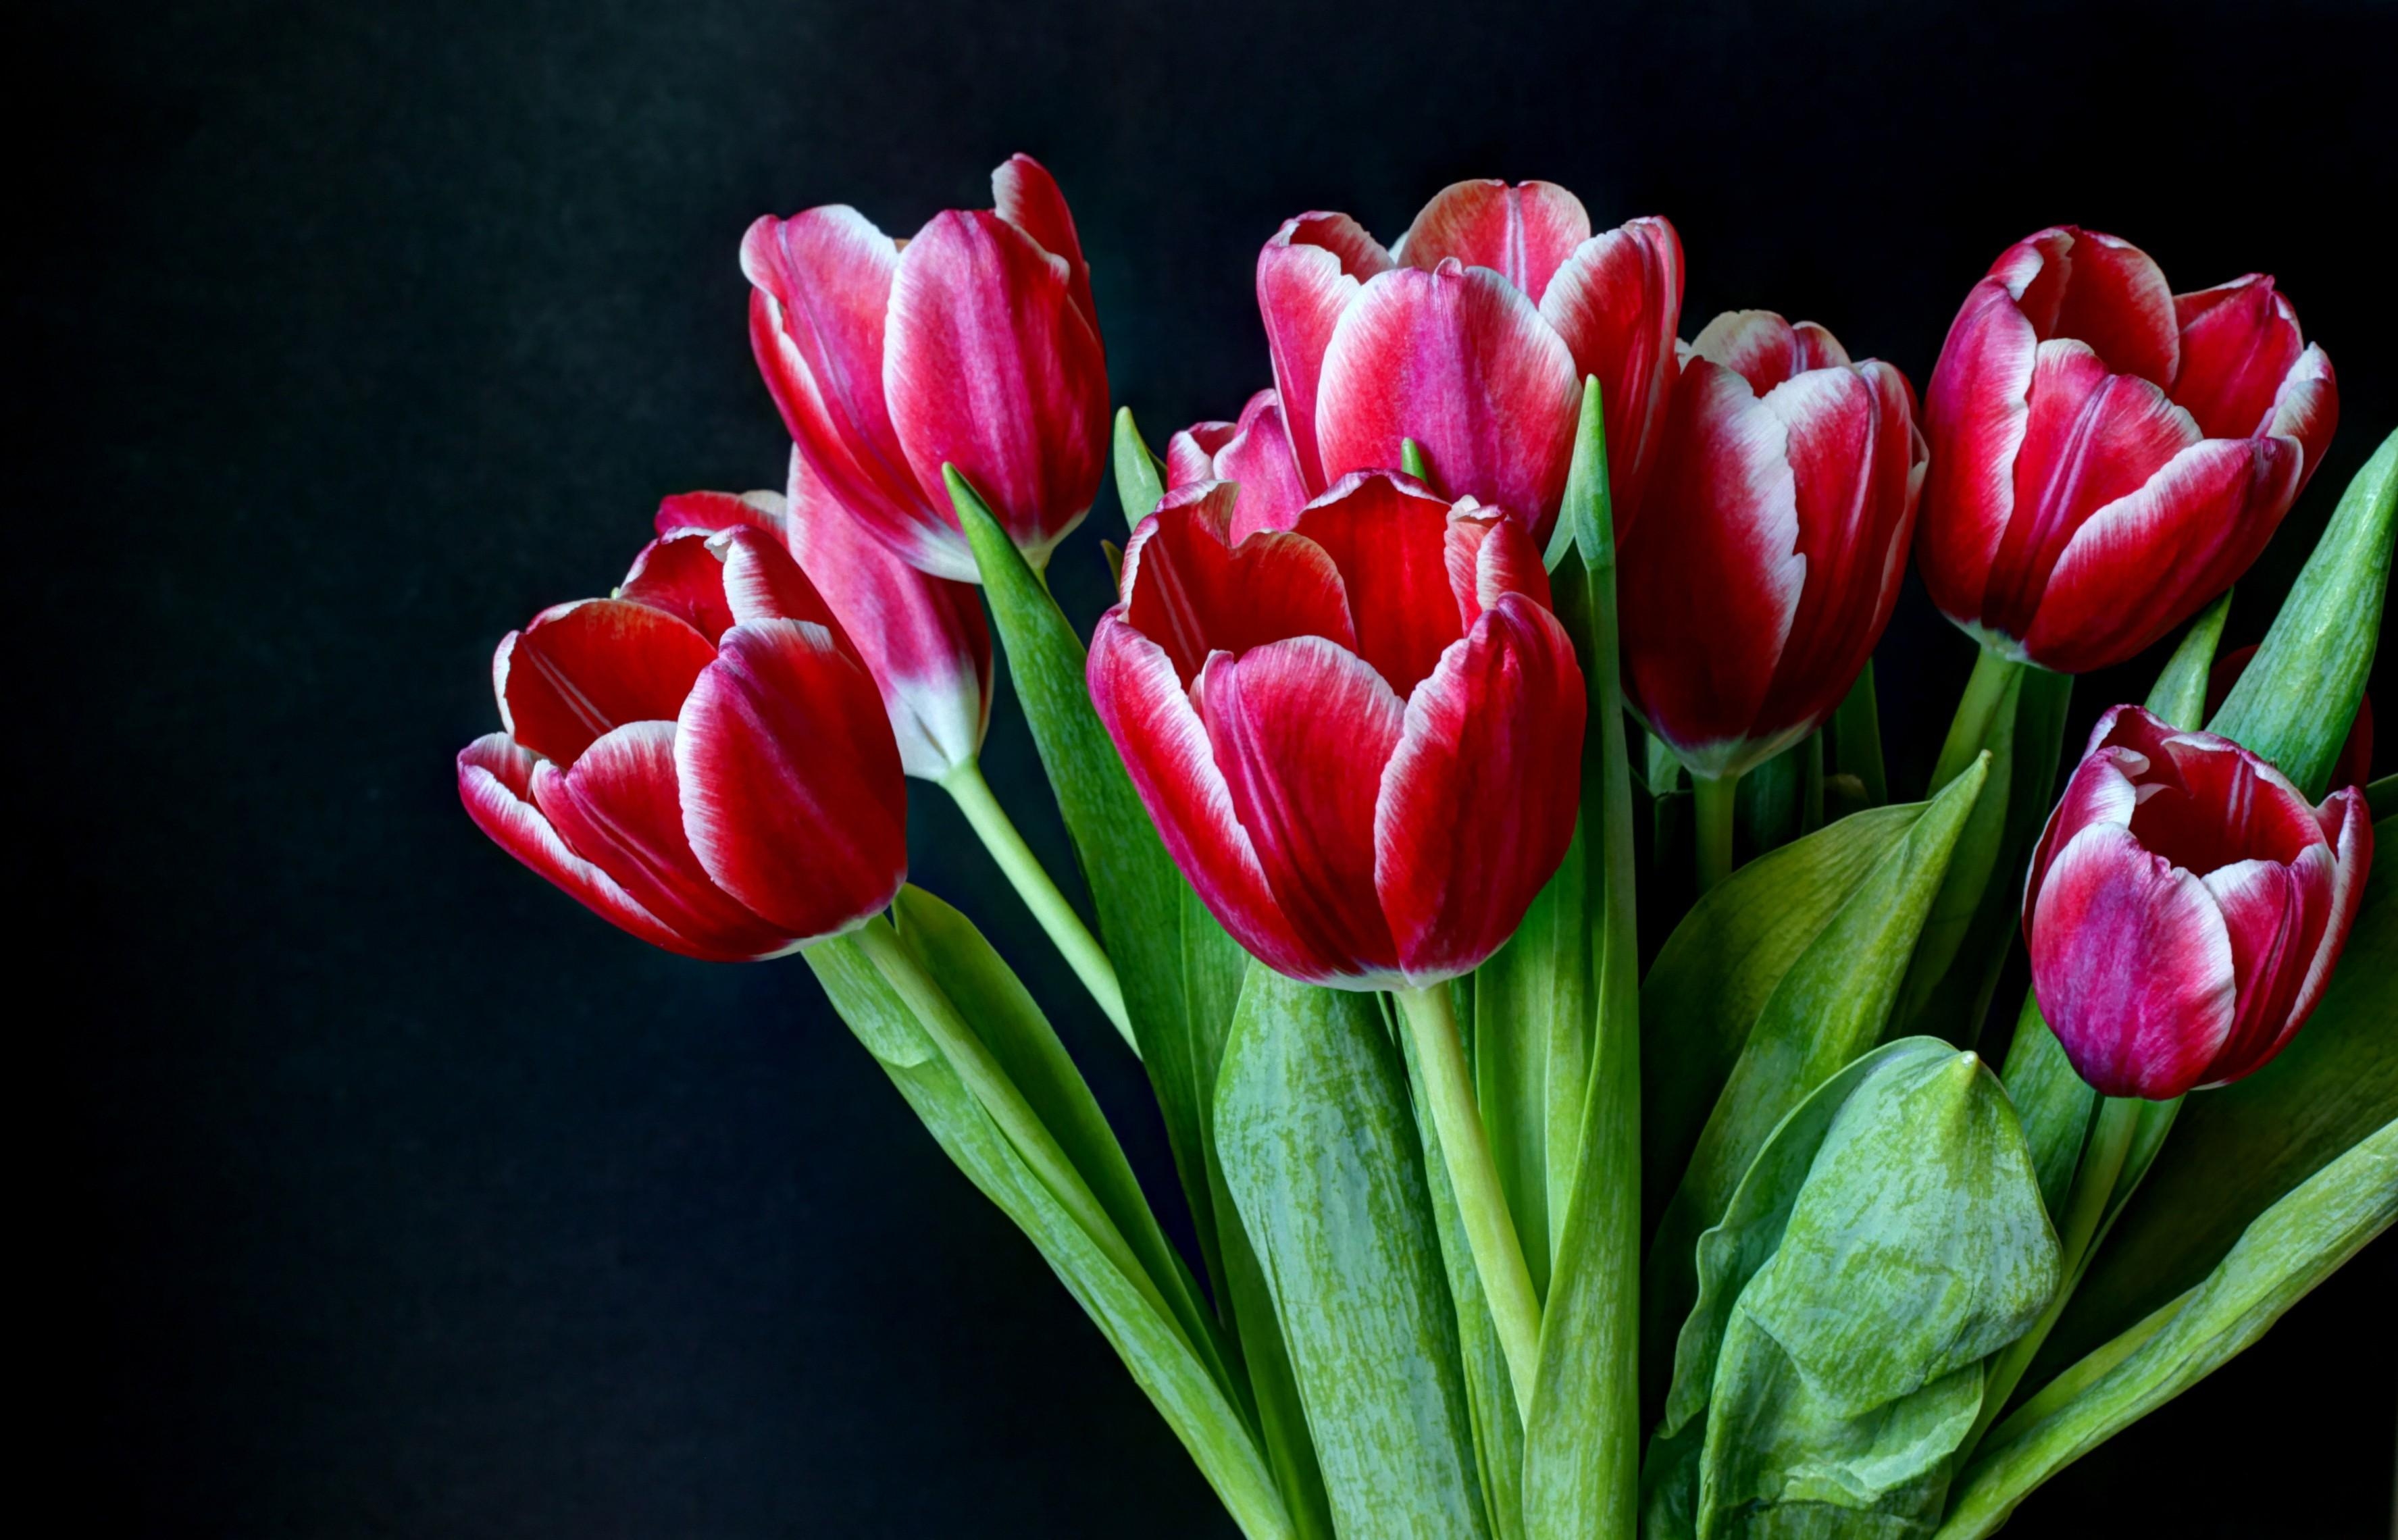 bouquet, flowers, tulips, dark background, bicolor, two colored